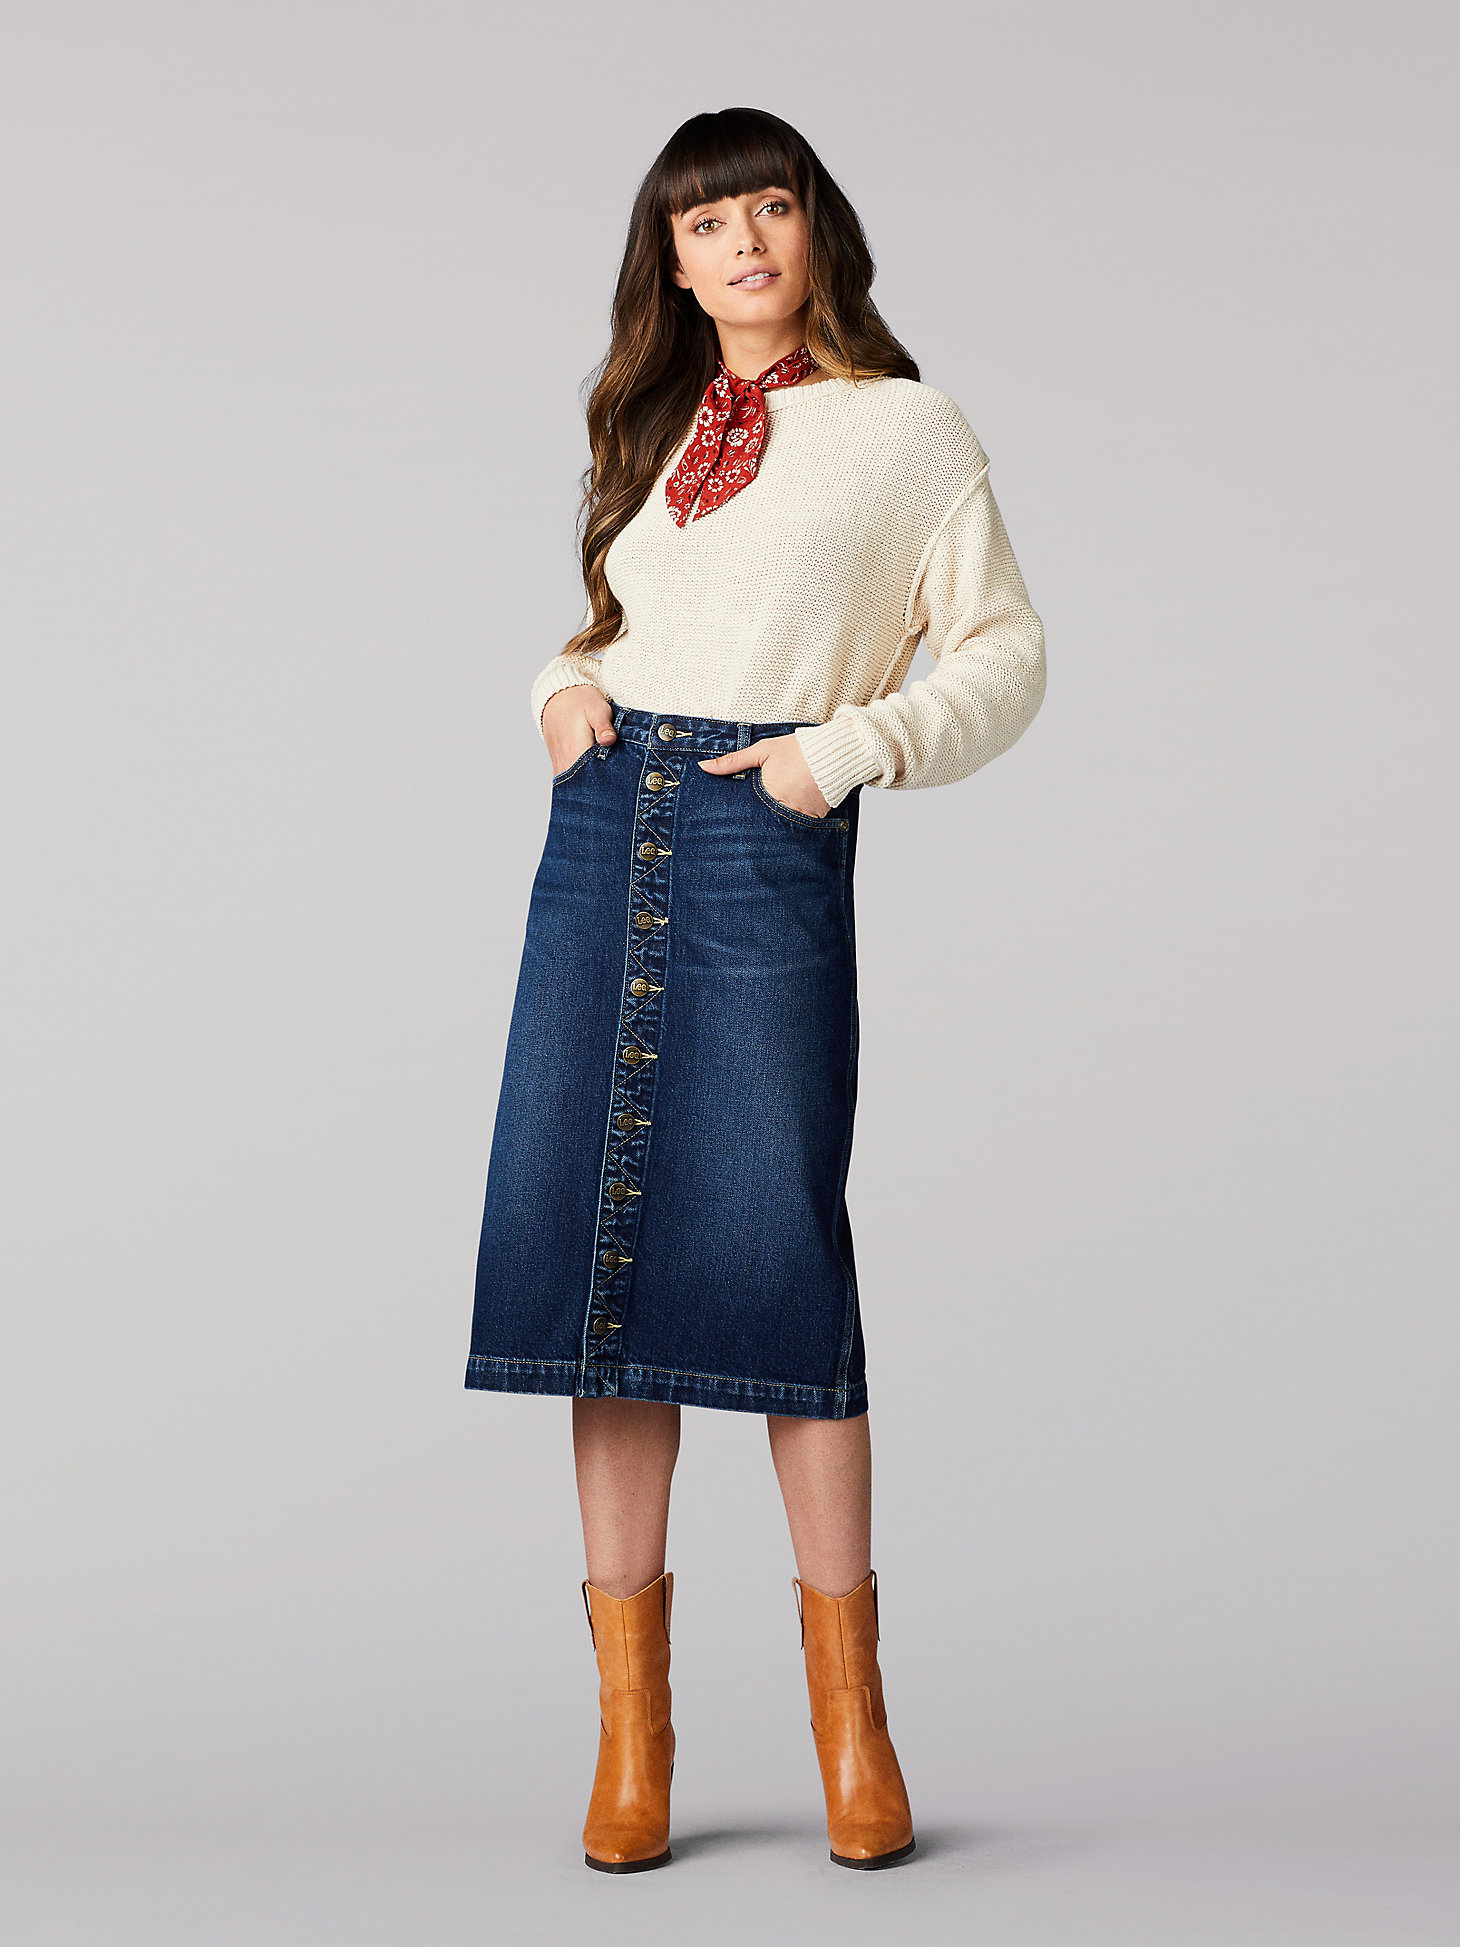 complicated Sociology in the middle of nowhere Women's Vintage Modern High Rise Midi Skirt